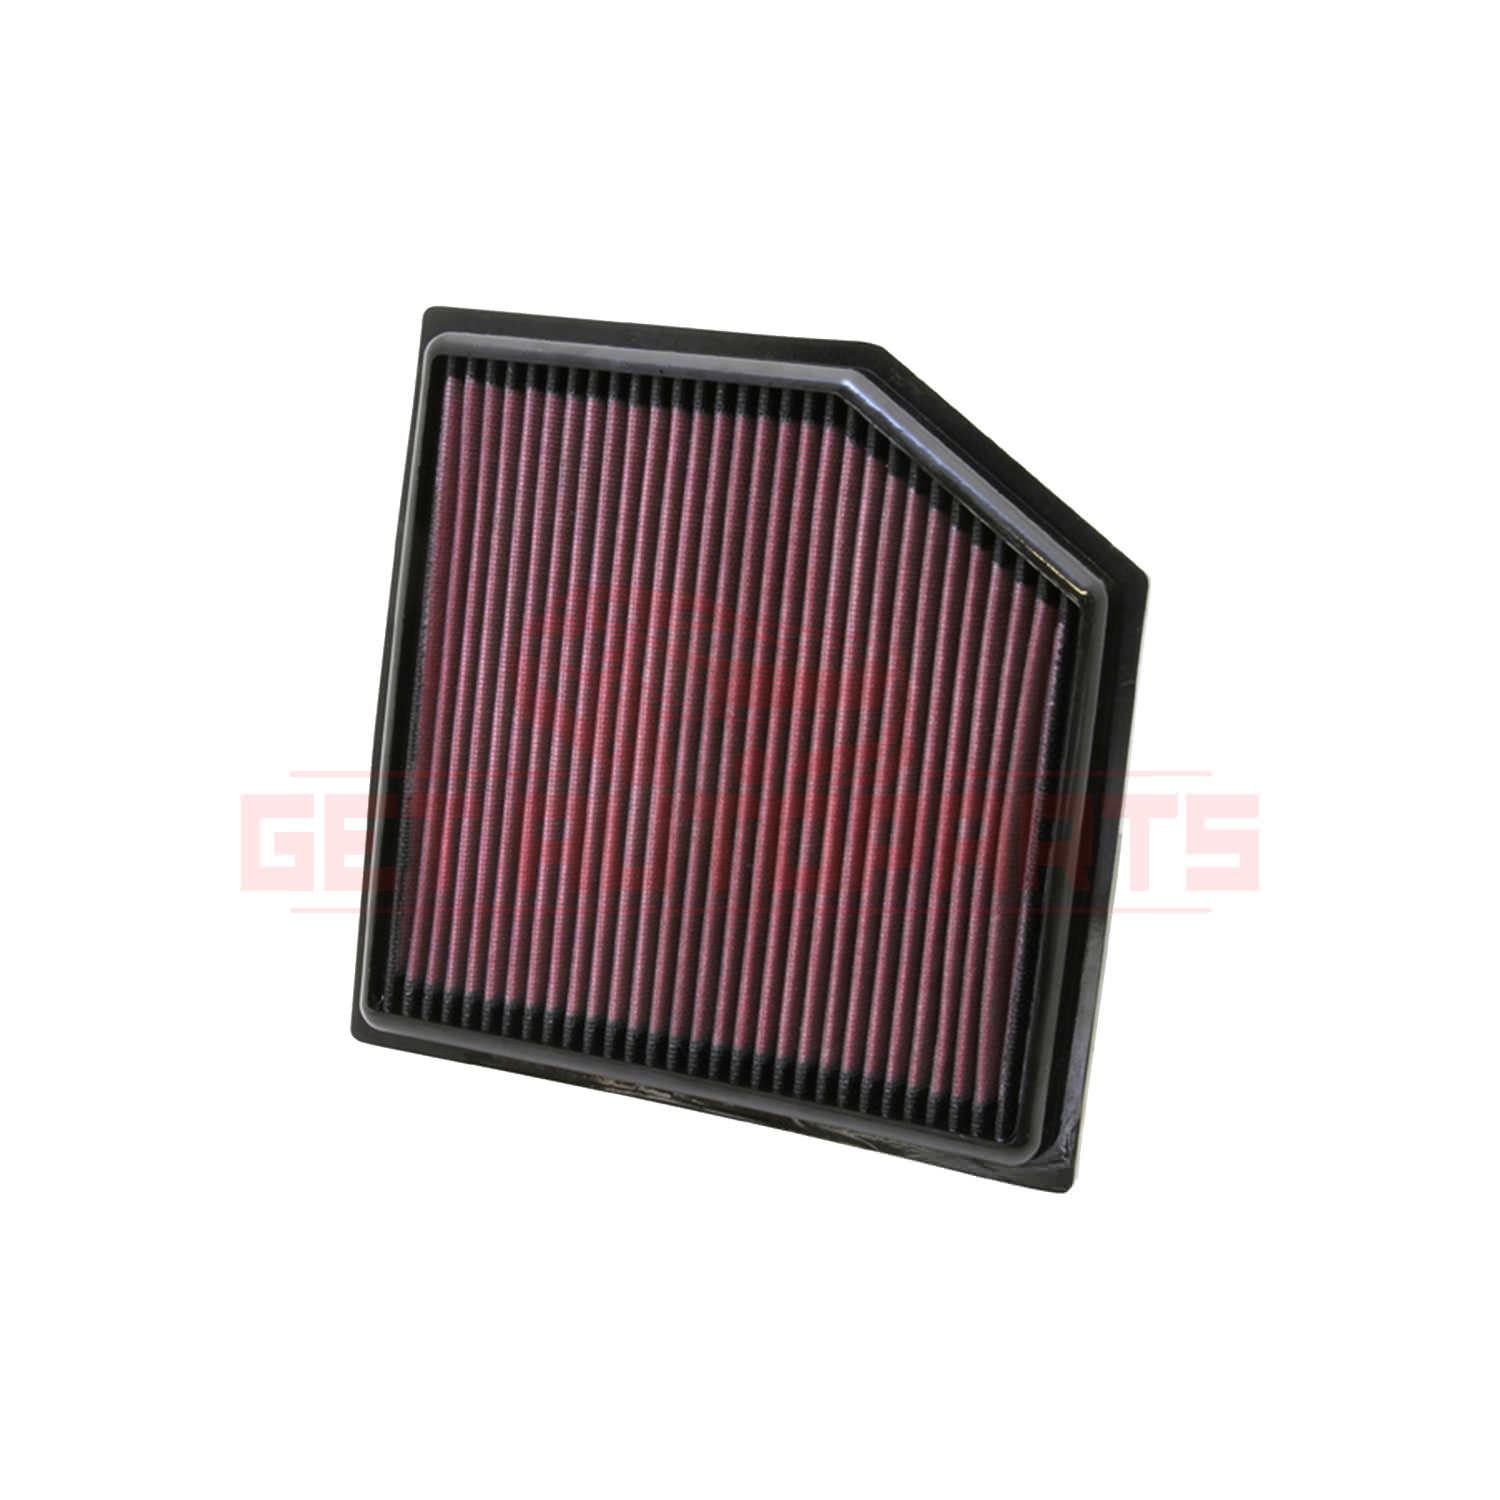 K&N Replacement Air Filter for Lexus GS450h 2013-2018